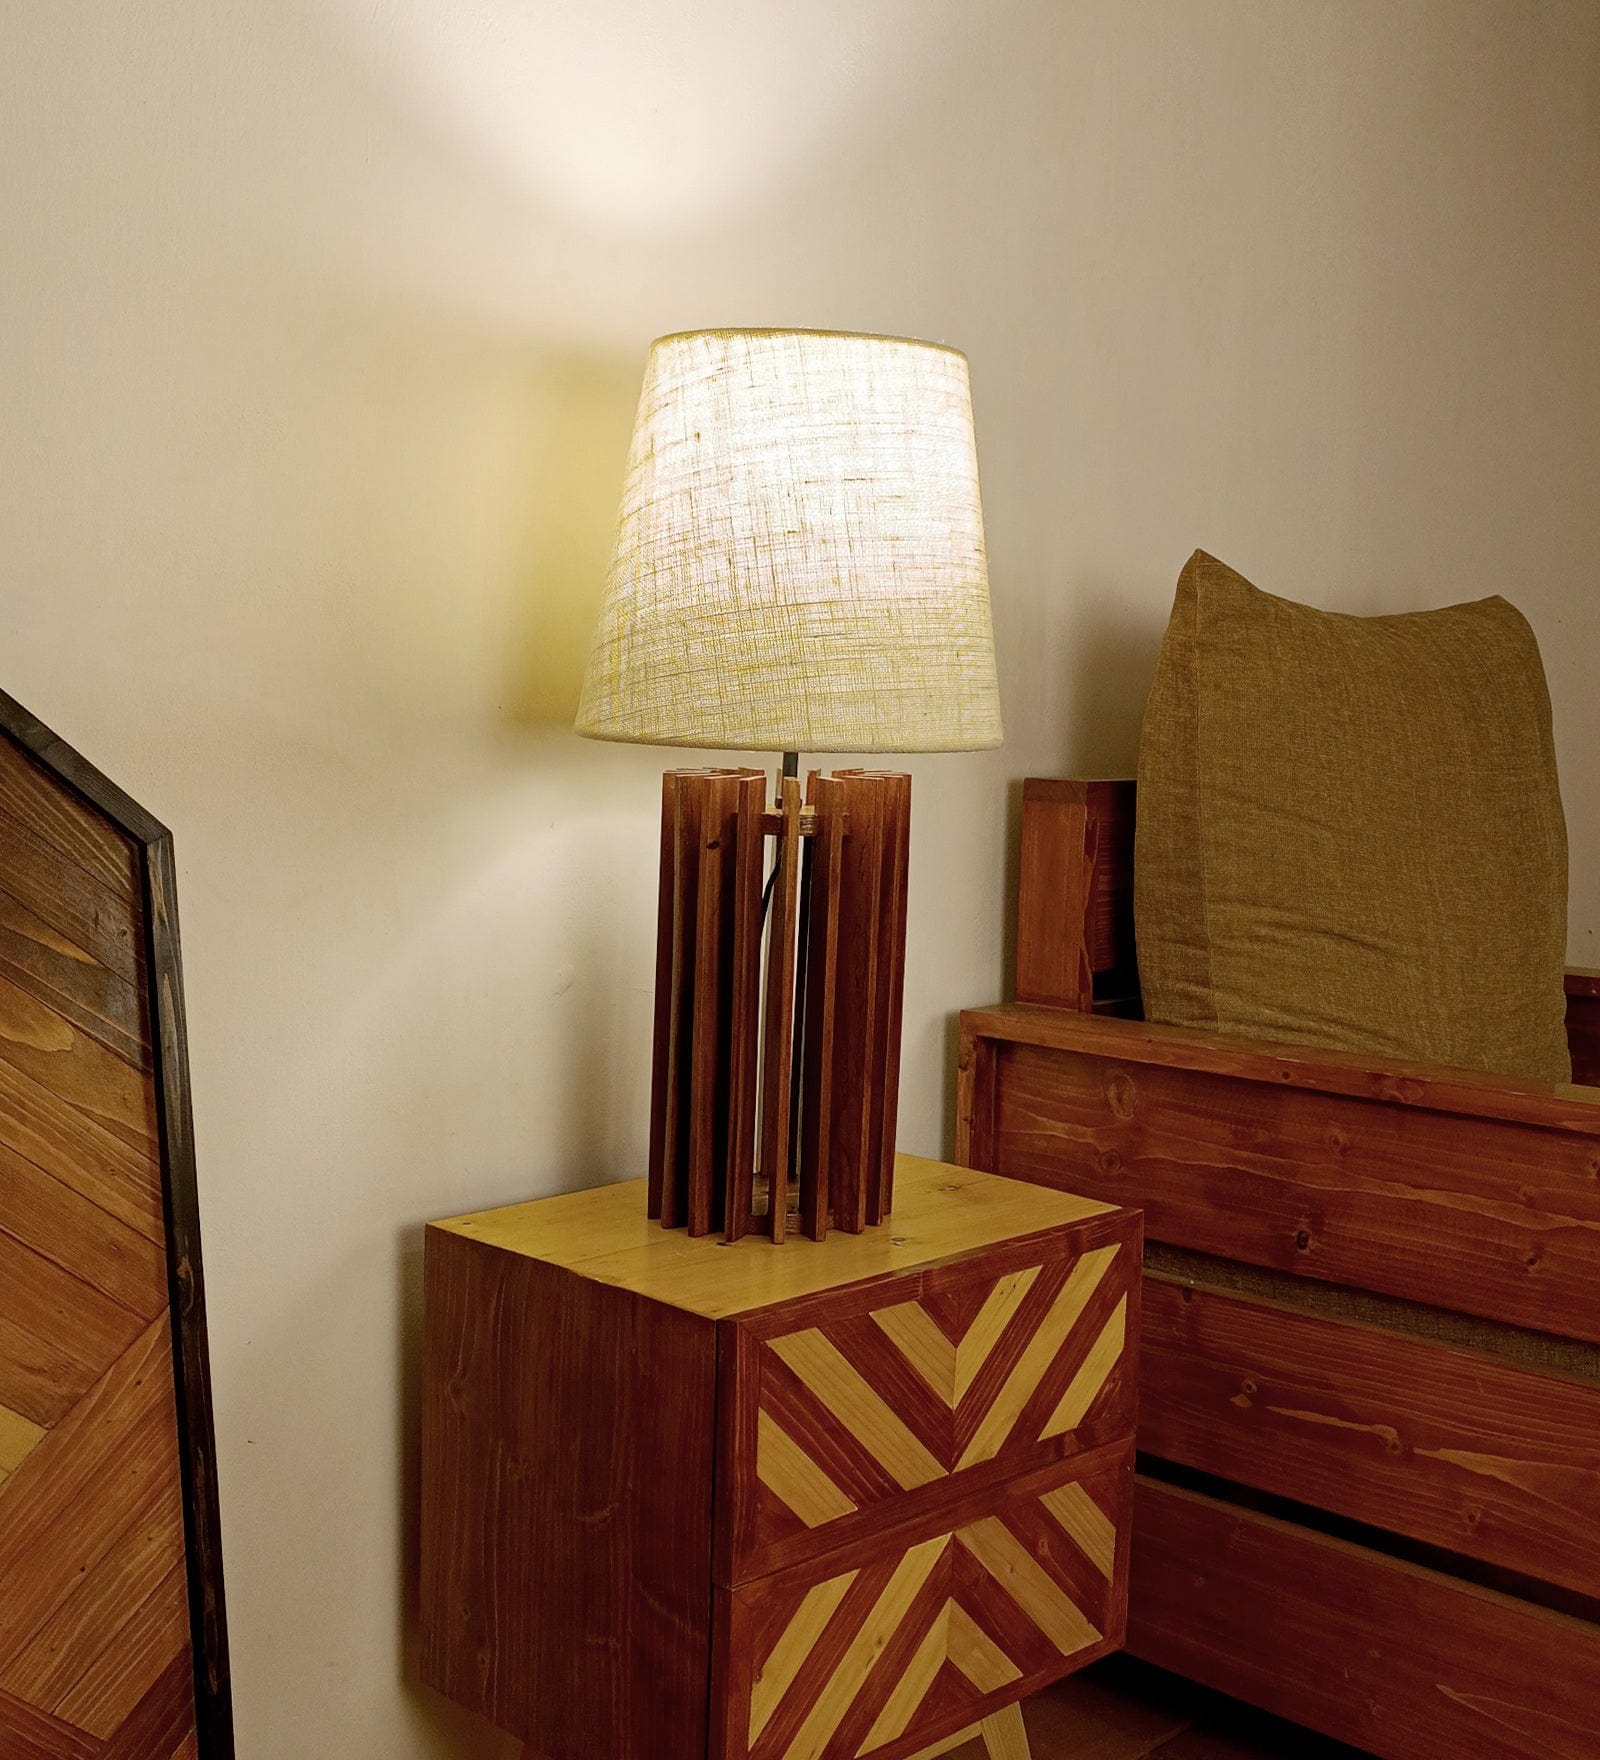 Ventus Brown Wooden Table Lamp with Yellow Printed Fabric Lampshade (BULB NOT INCLUDED)